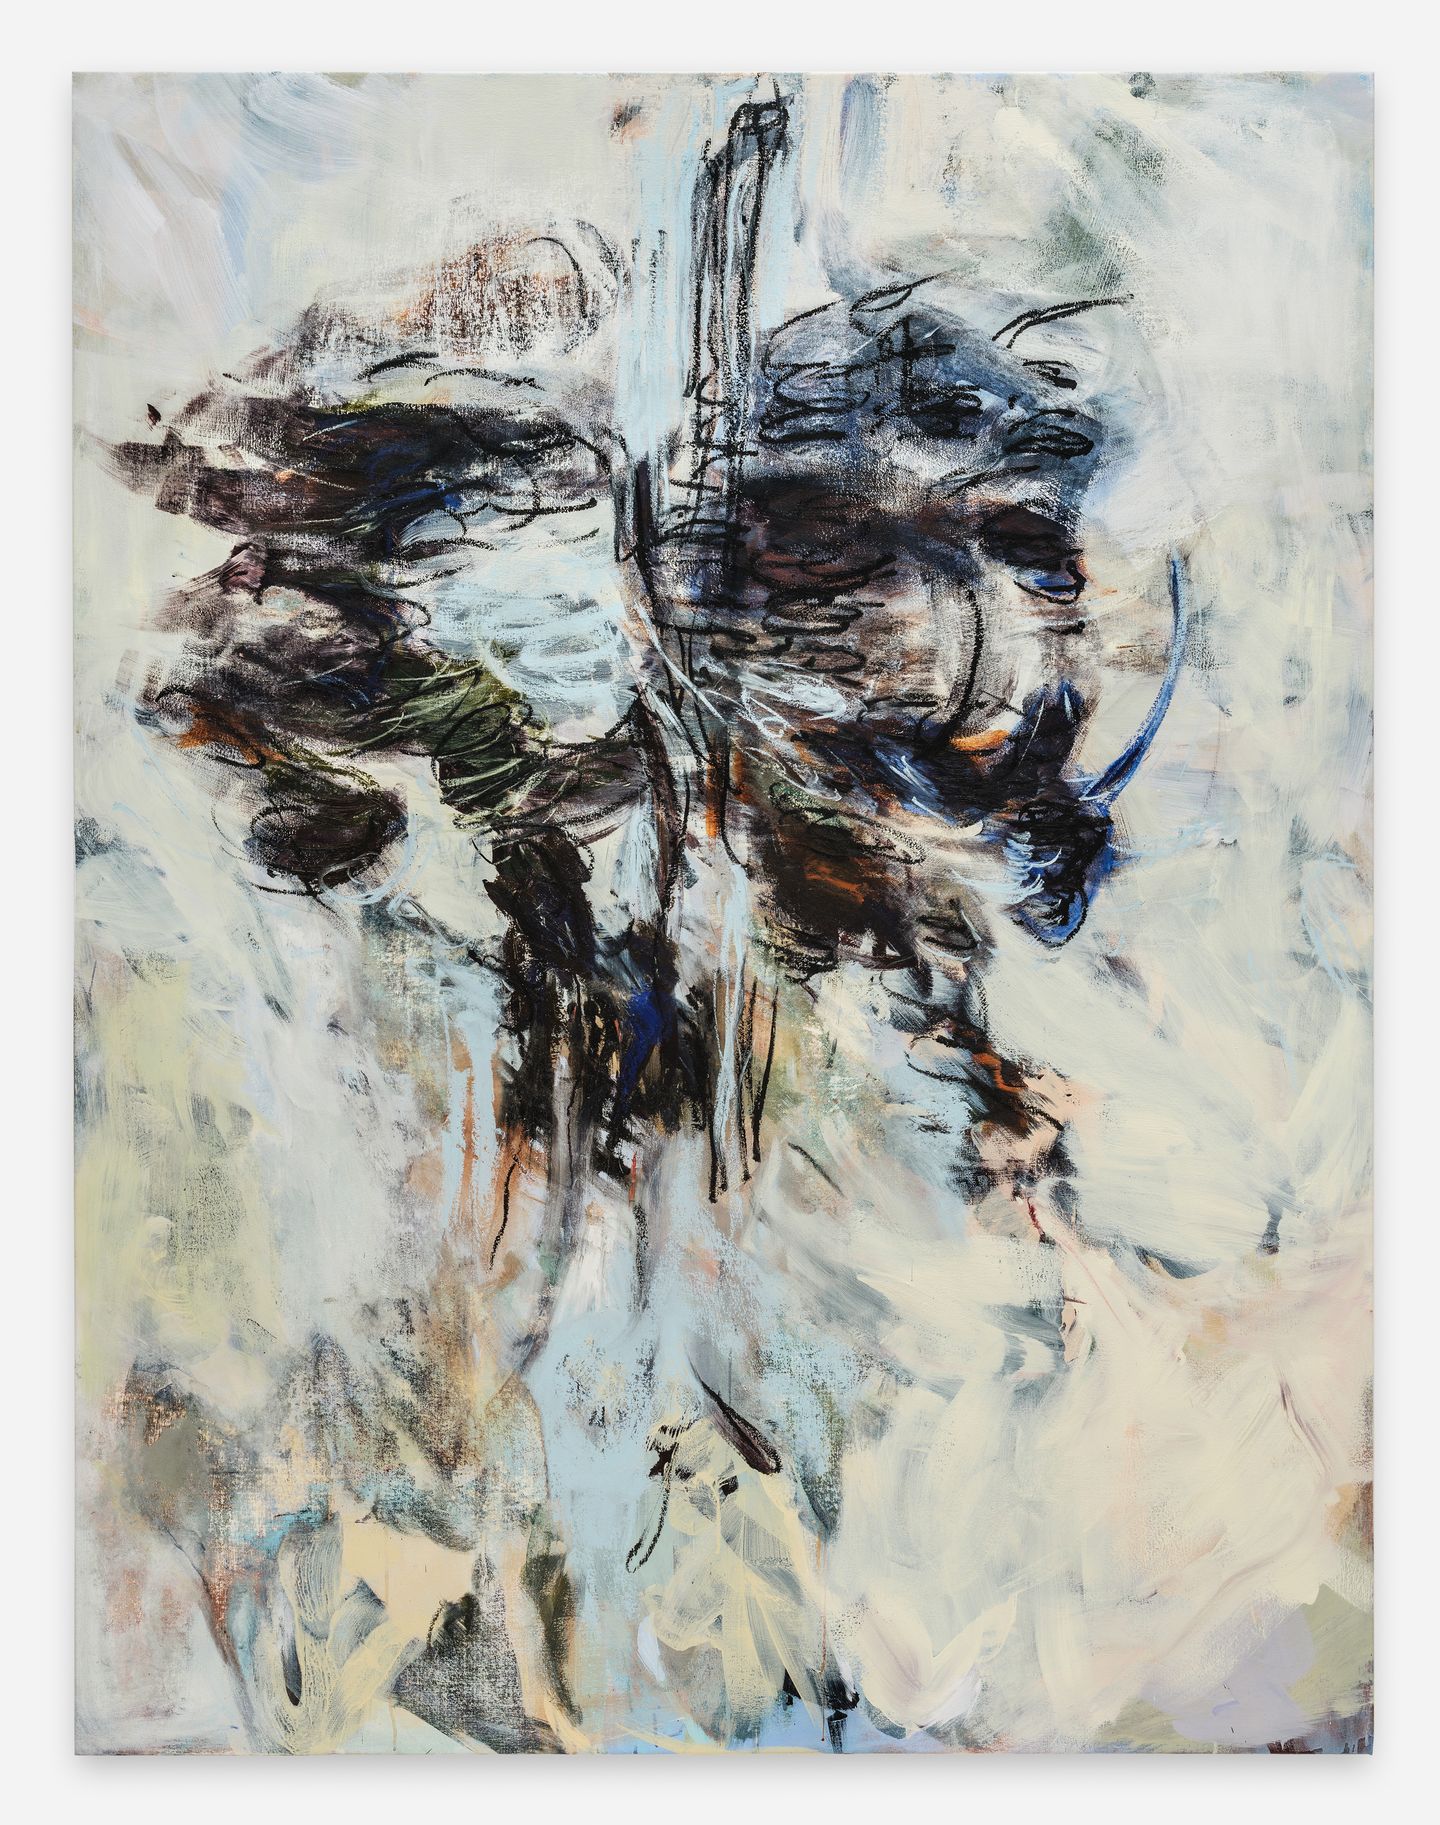 Megan Rooney, Up Torso (2021). Acrylic and oil stick on canvas. 199.6 x 152.3 x 3.5 cm. Courtesy © Megan Rooney and Thaddaeus Ropac.